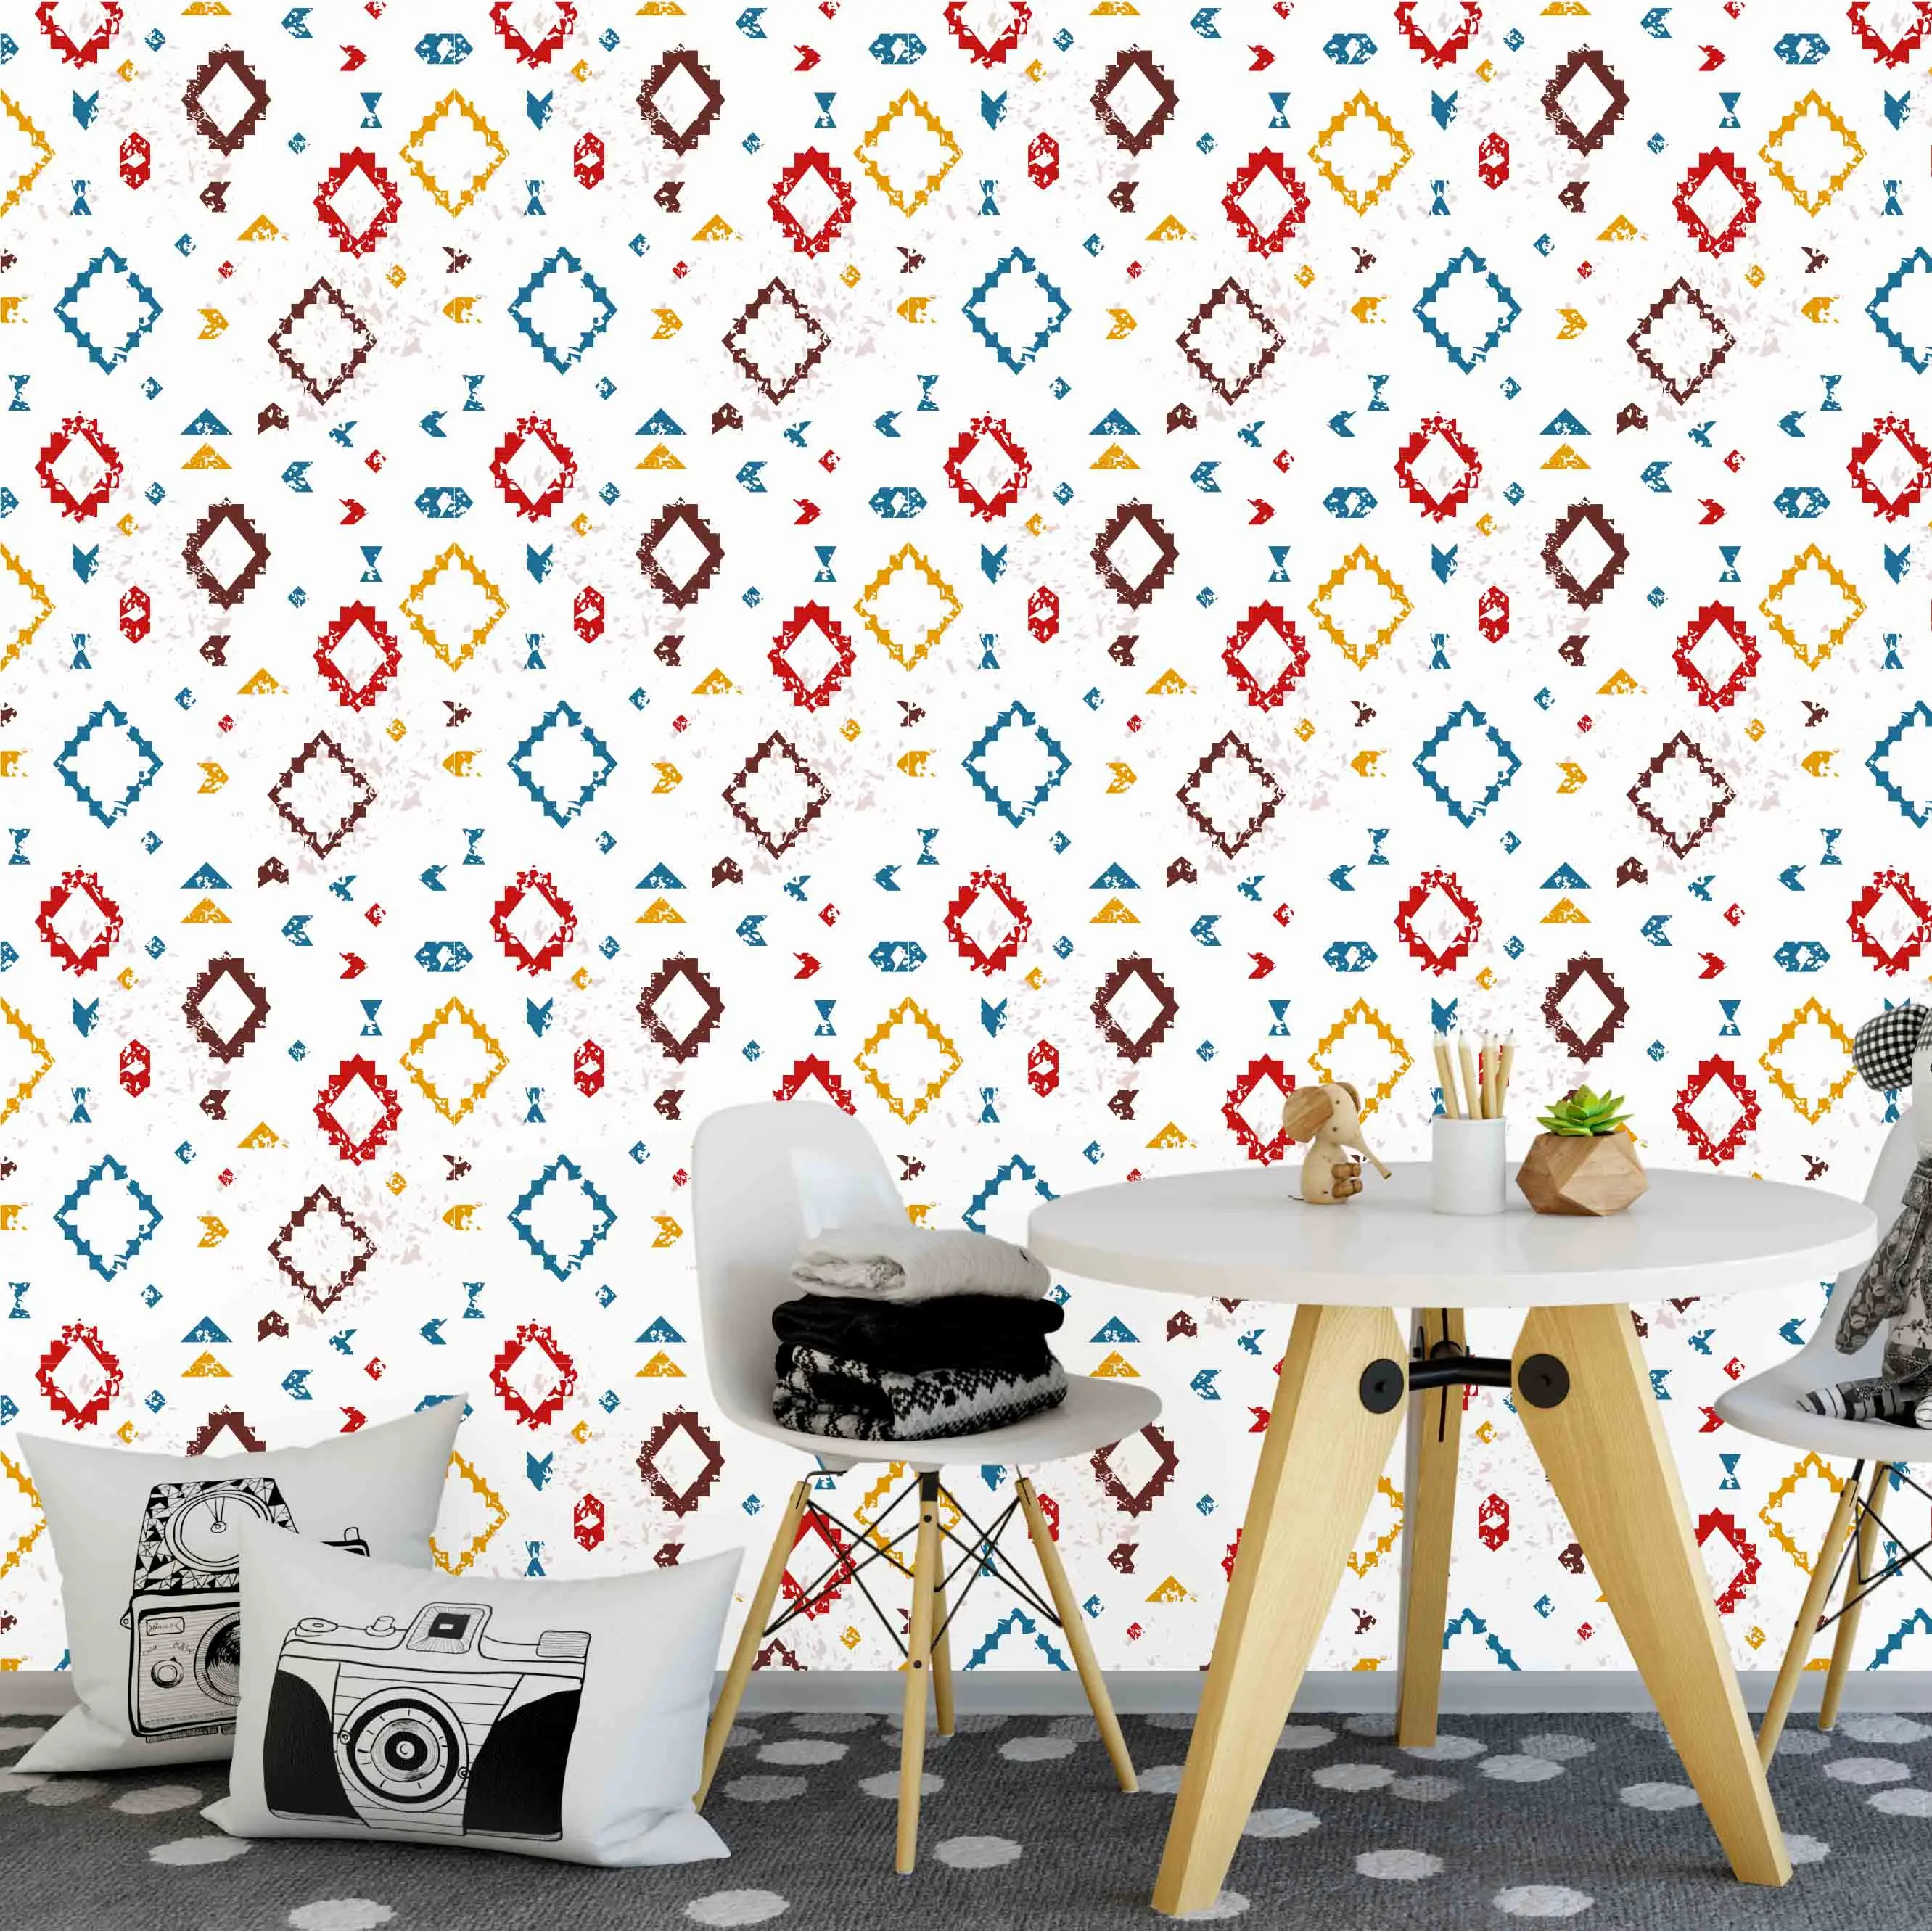 Children Room Wall design Peel and Stick Wallpaper Colorful Watercolor Spots Removable Room Decor Accent Wall